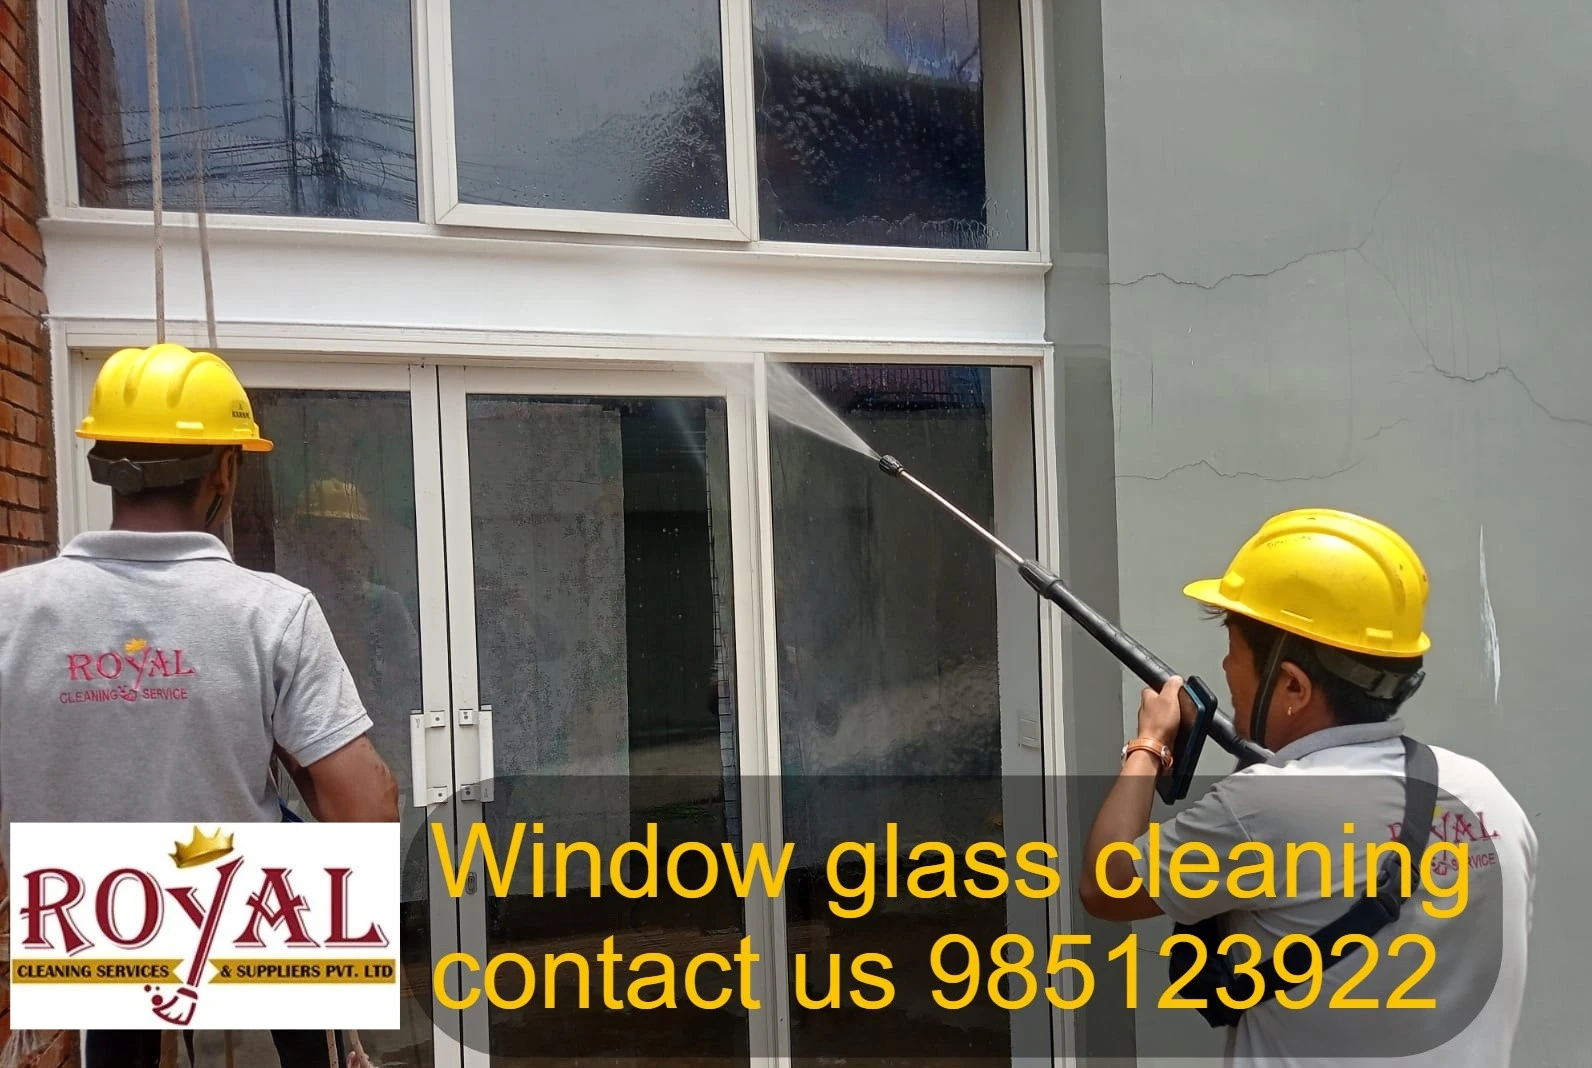 Why to hire Royal cleaning services for exterior glass cleaning service in Kathmandu?